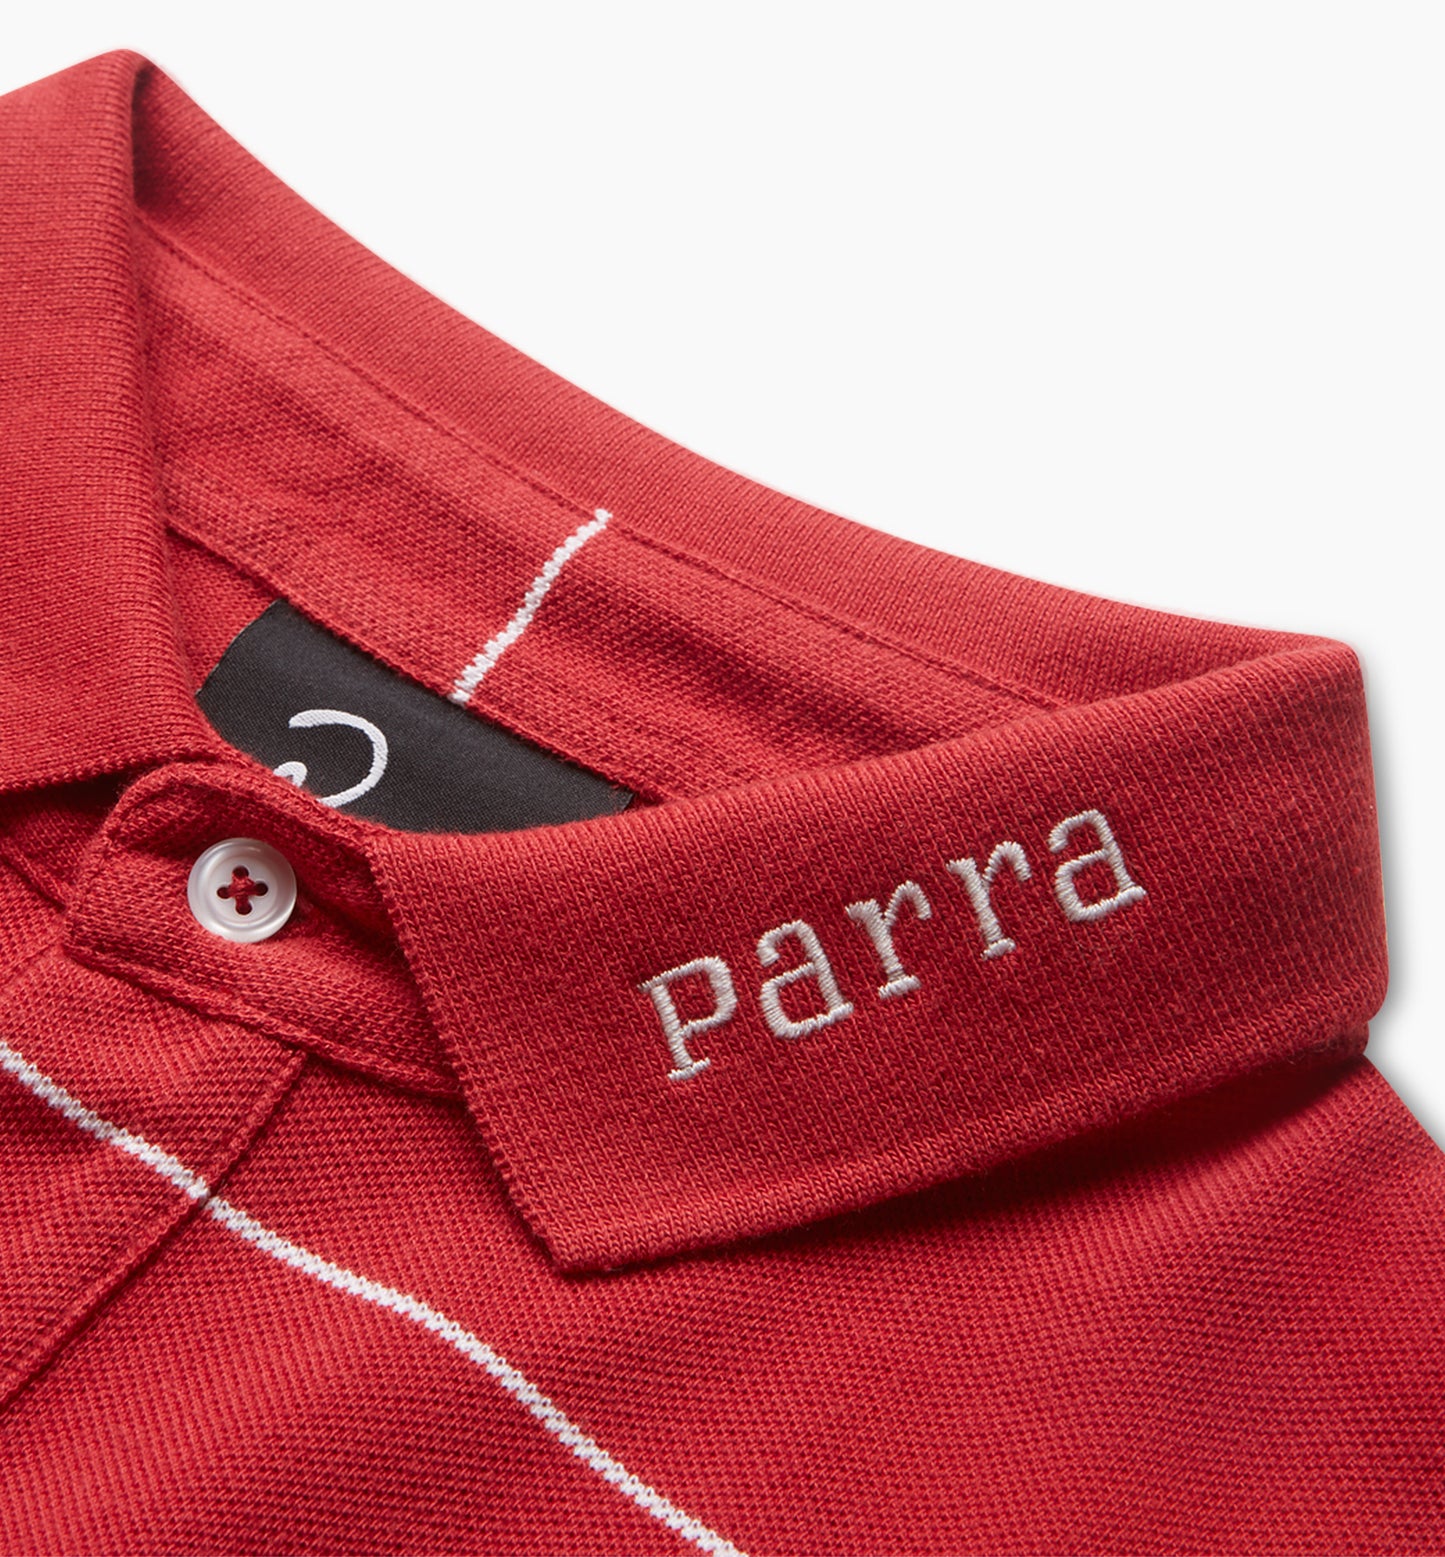 By Parra Rudy Polo Shirt